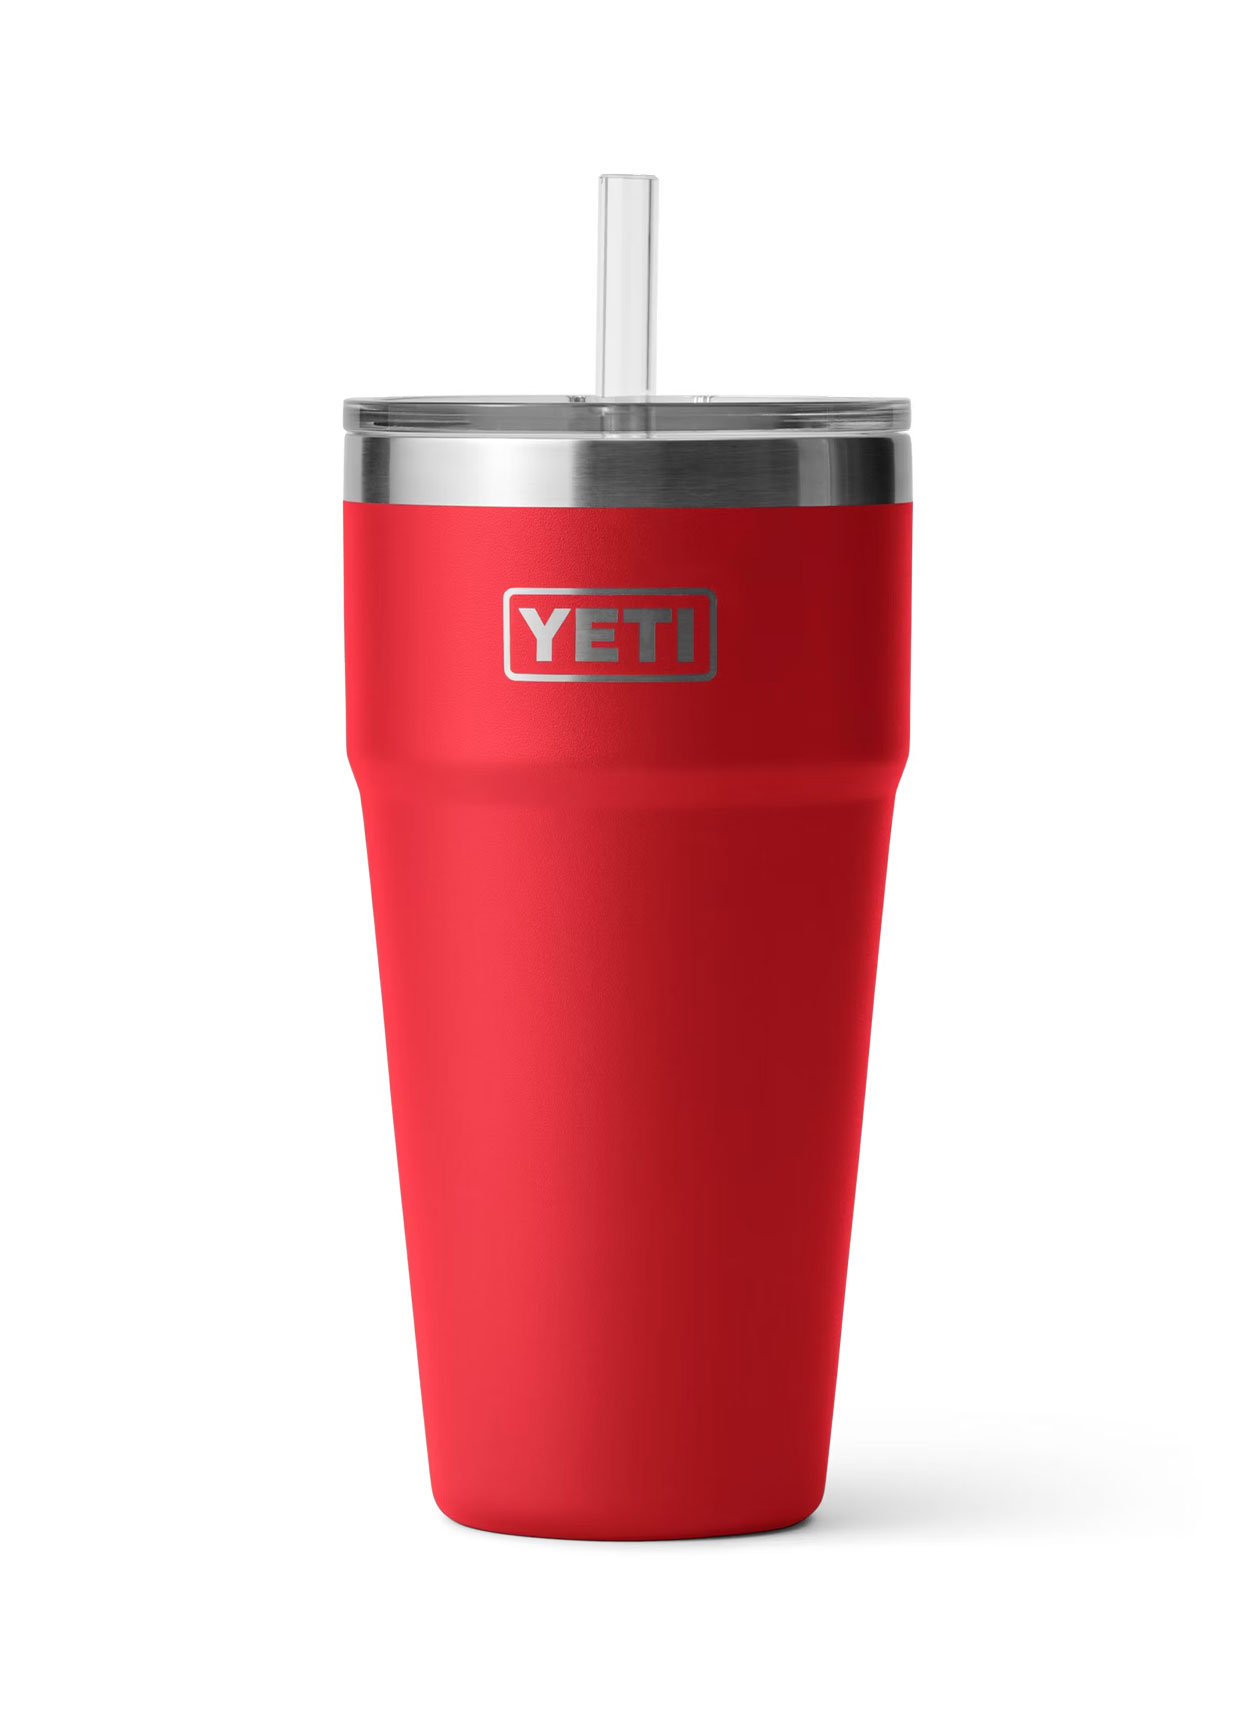 Yeti Rambler 26 oz Stackable Cup with Straw Lid